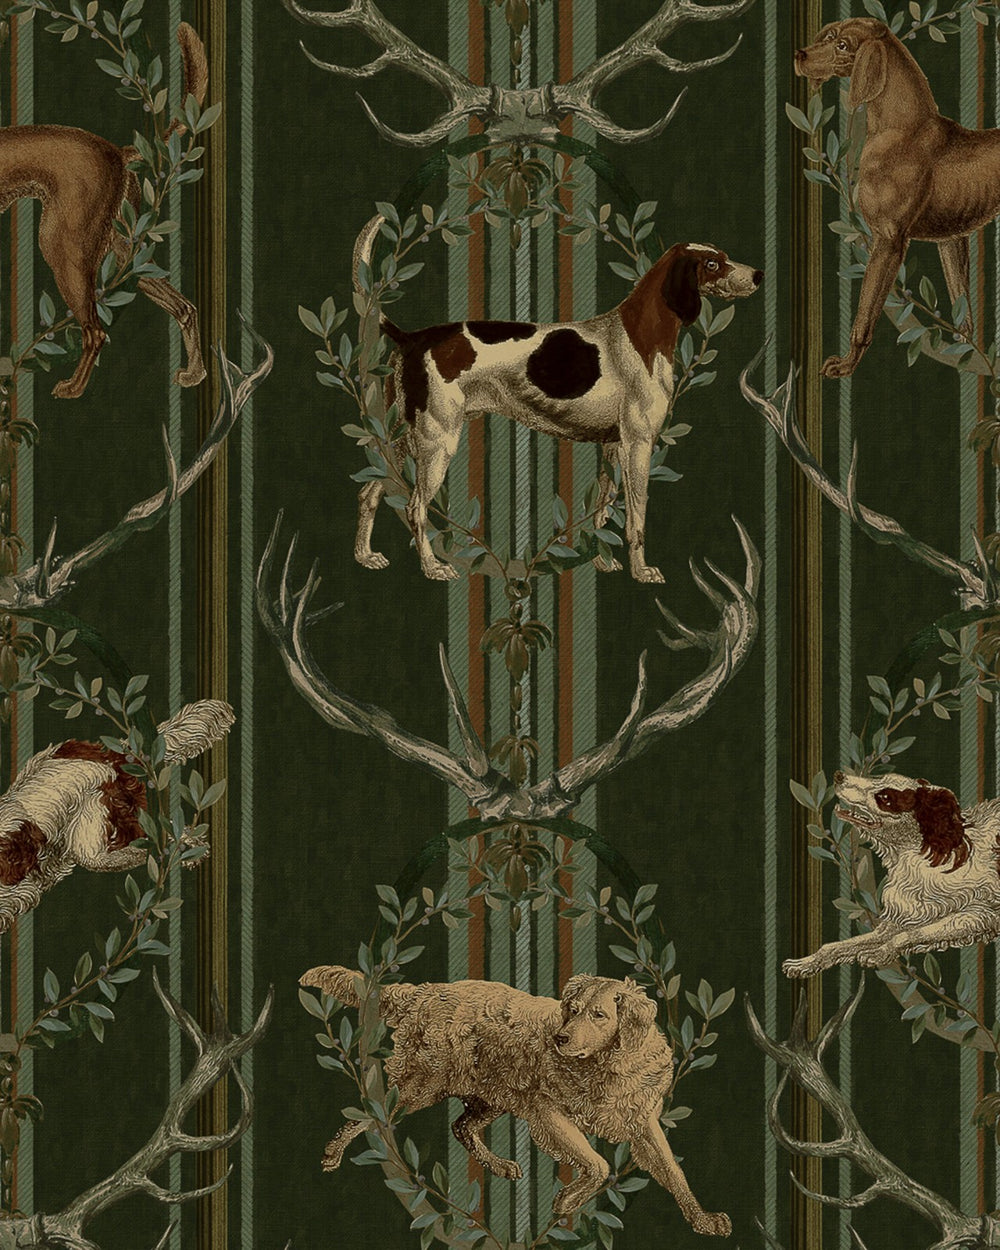 Mind-the-gap-Tyrol-collection-Mountain-Dogs-WP20675-wallpaper-green-stripes-anters-alpine-dogs-wreaths-pattern-alpine-cabin-chalet-style-hunting-lodge-folk-pattern-traditional-cypress-green